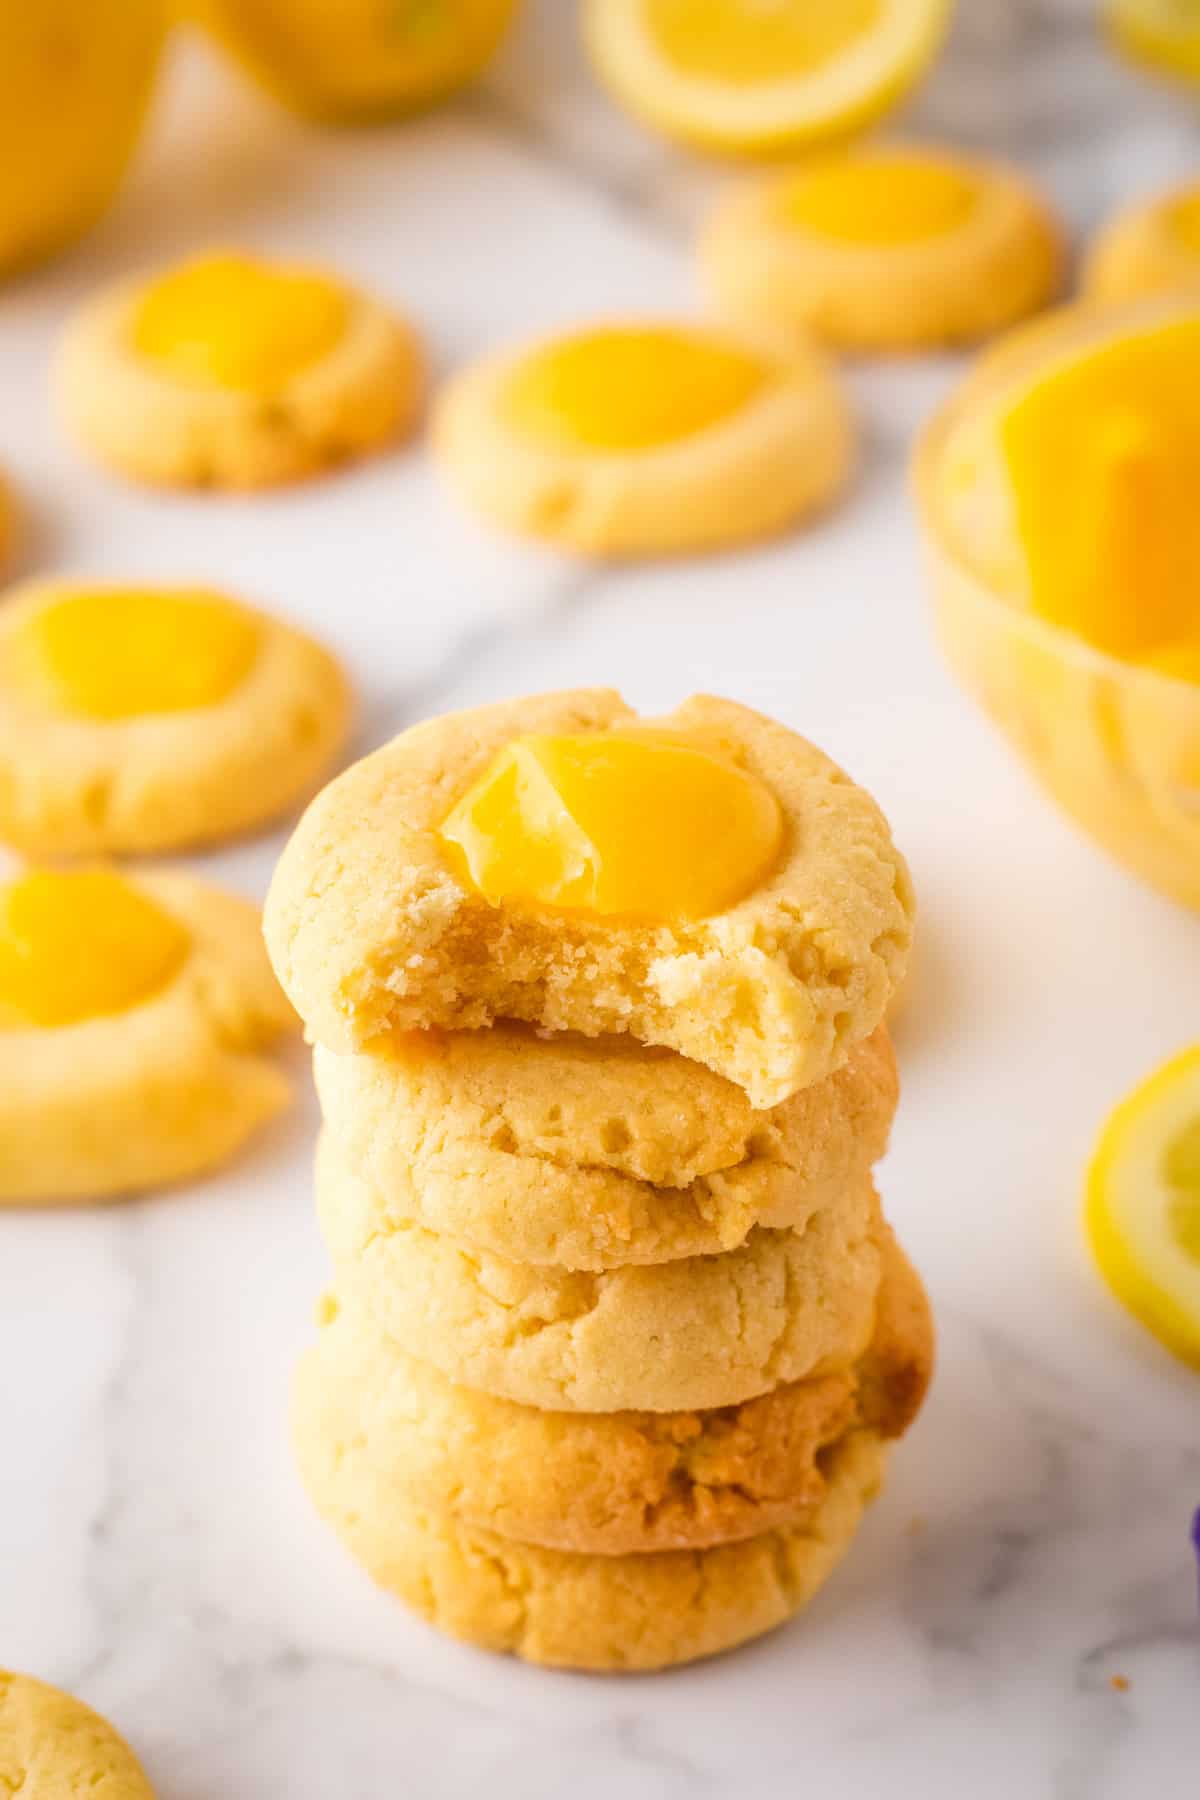 Side angle of stacked lemon curd cookies with one bite taken out of top one.